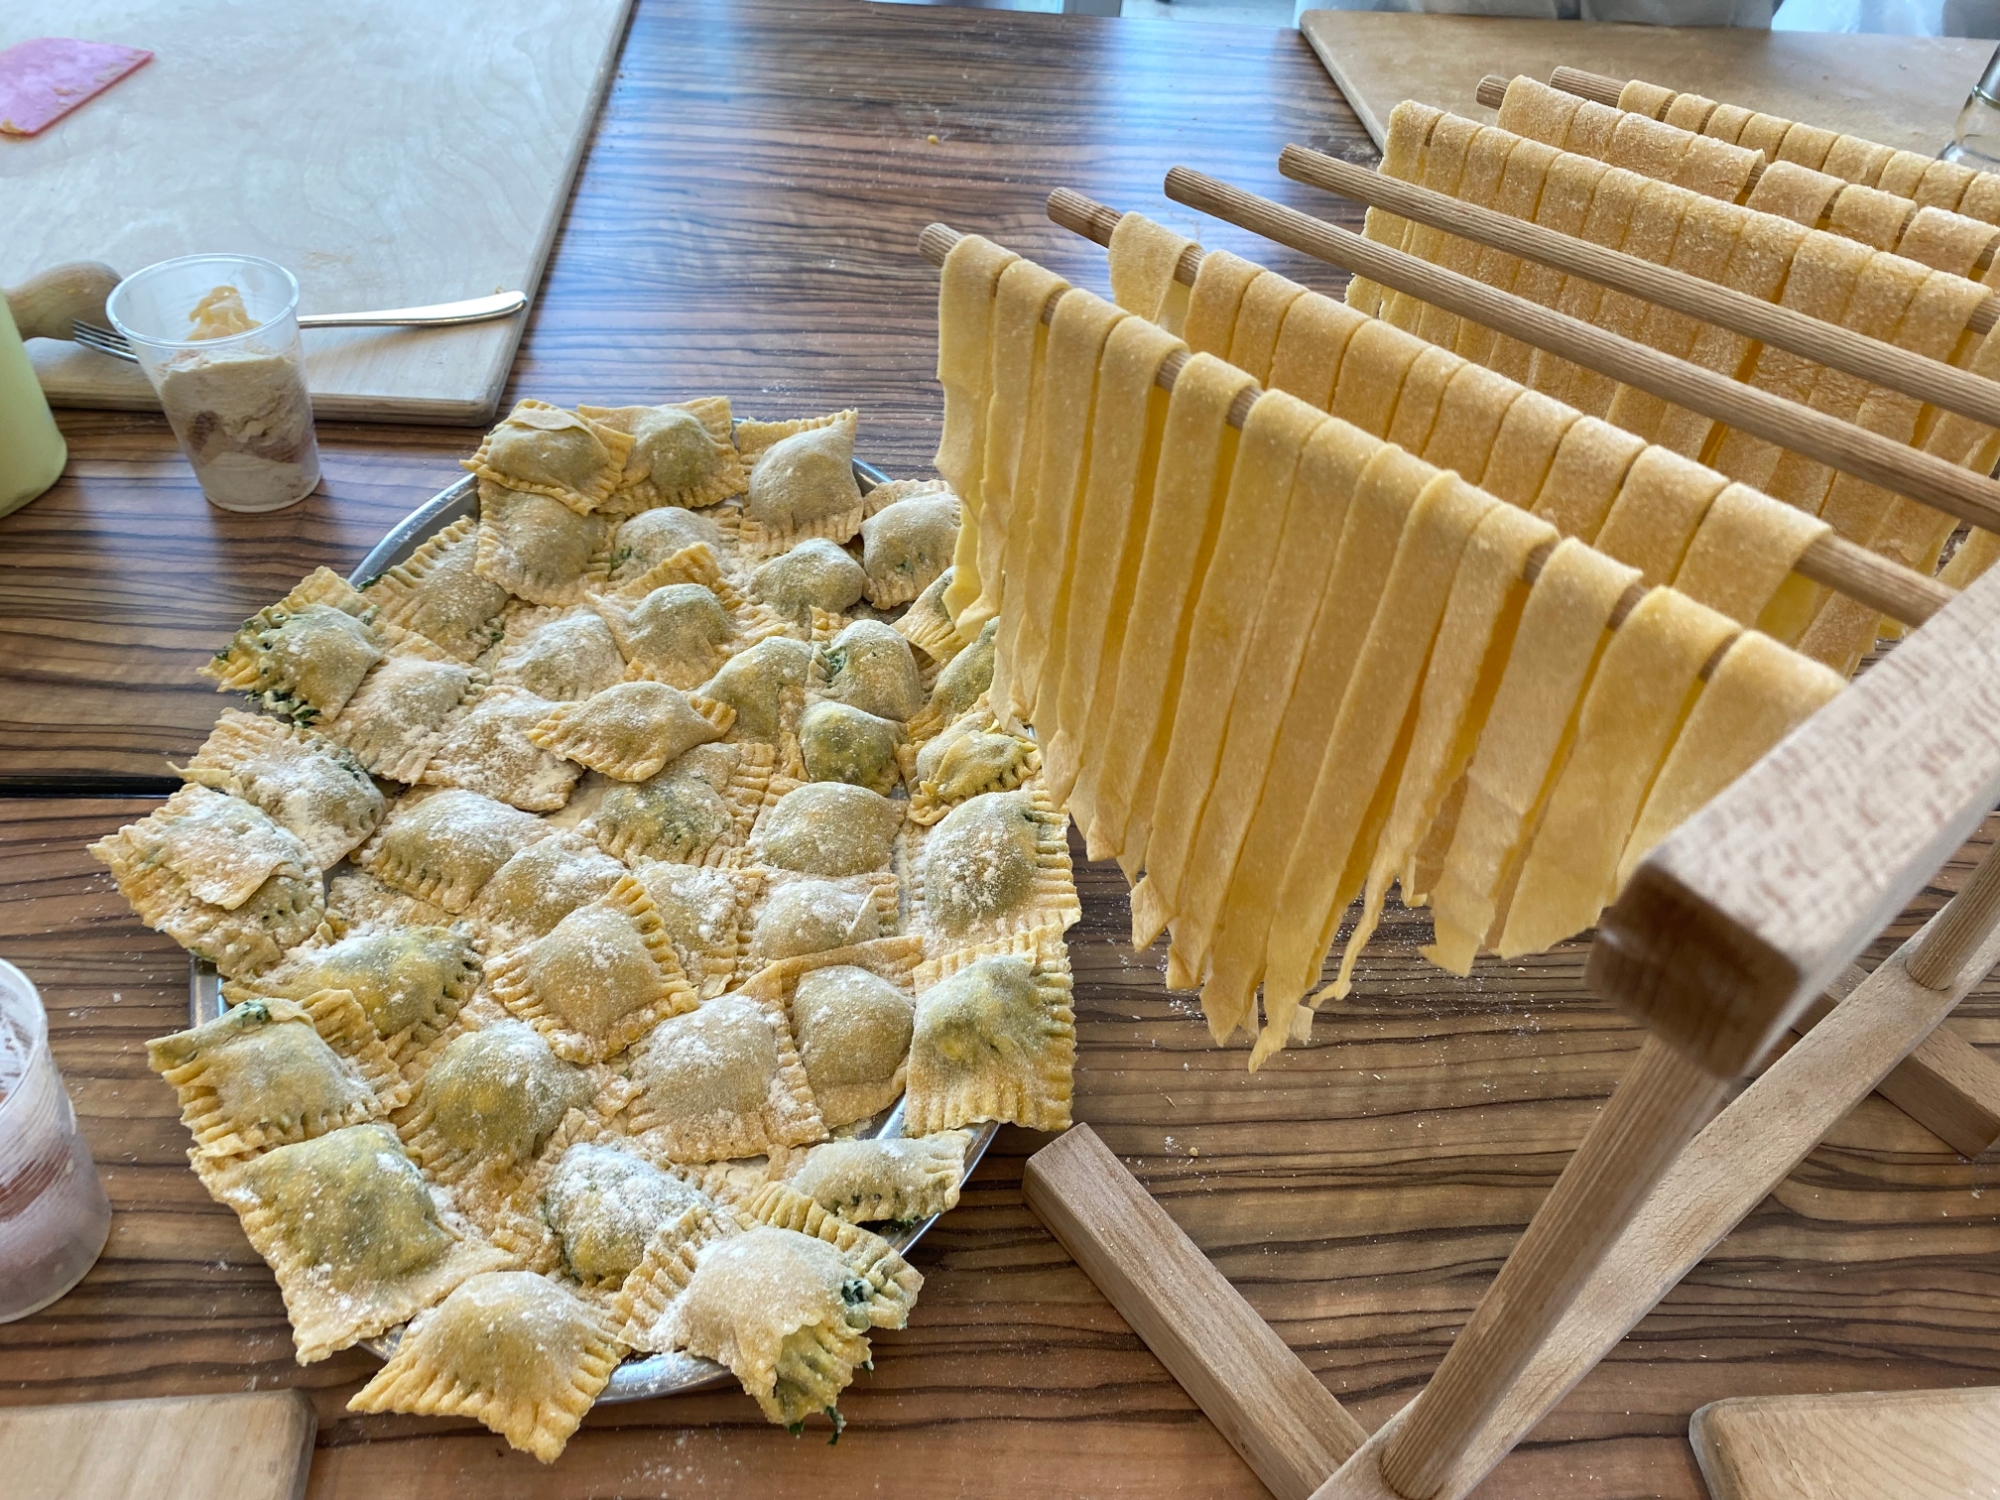 Gaylord Students make handmade pasta in Italy.